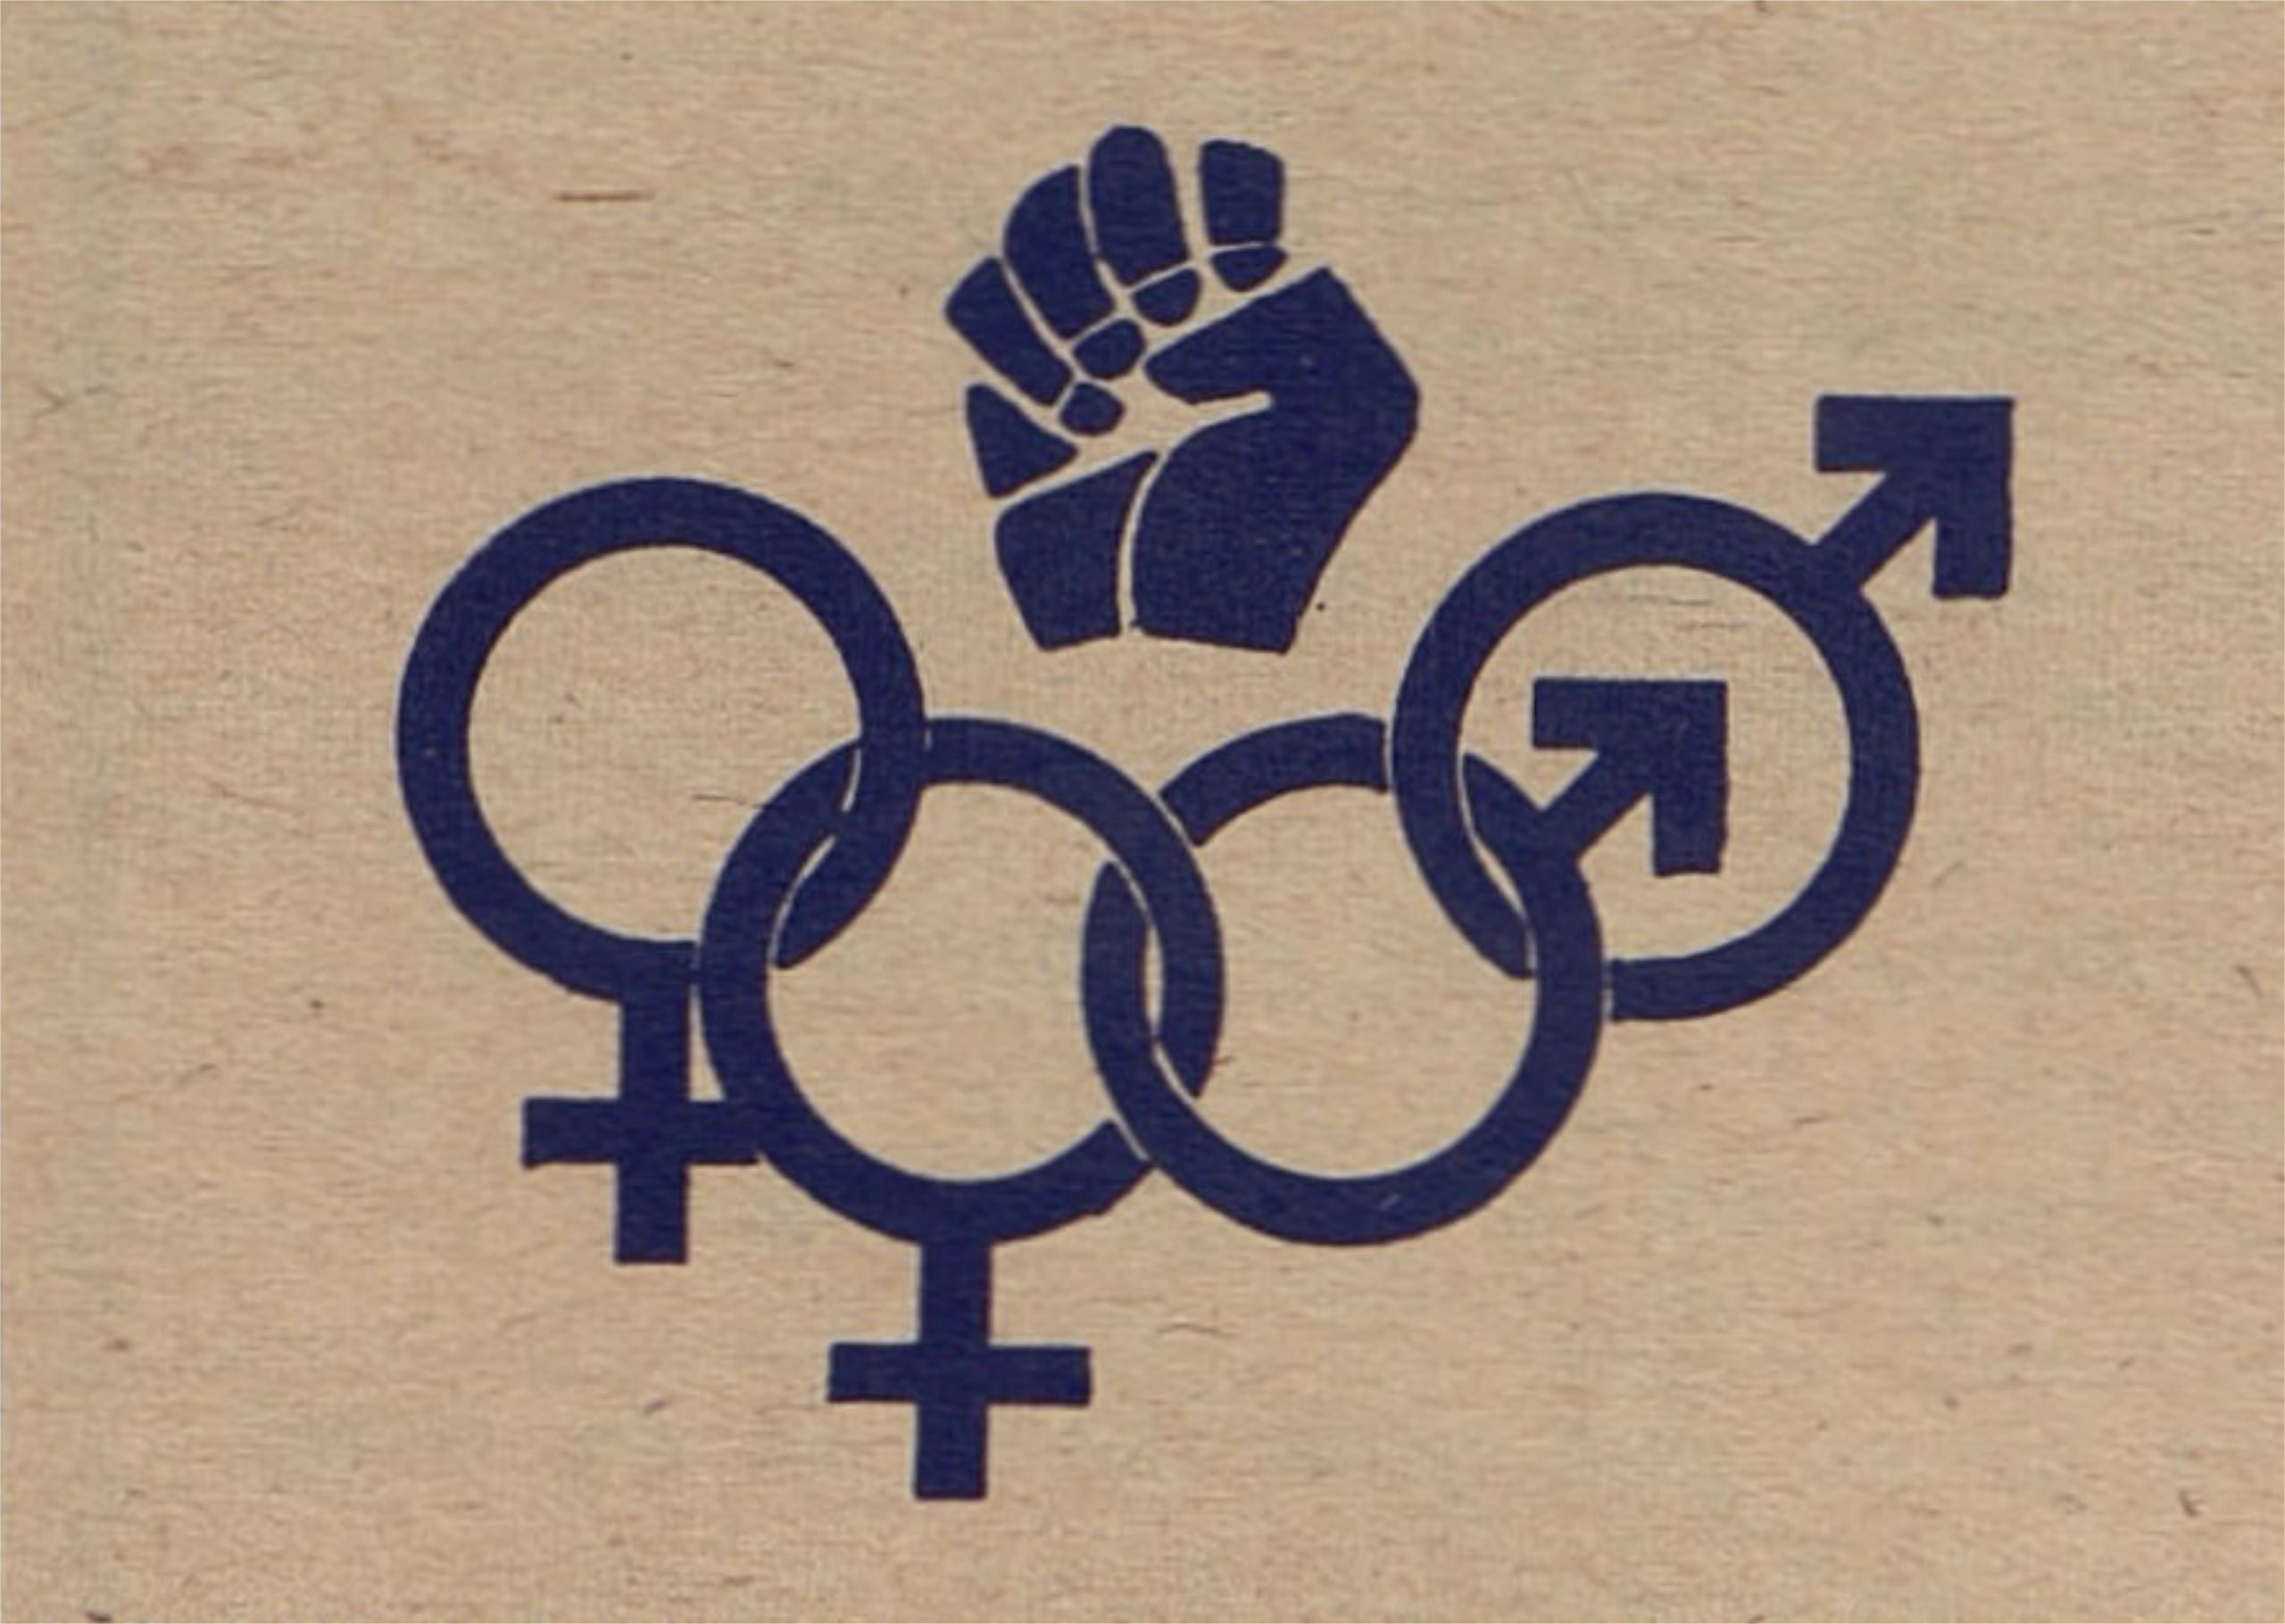 A design of linked male and female symbols, with a raised fist.